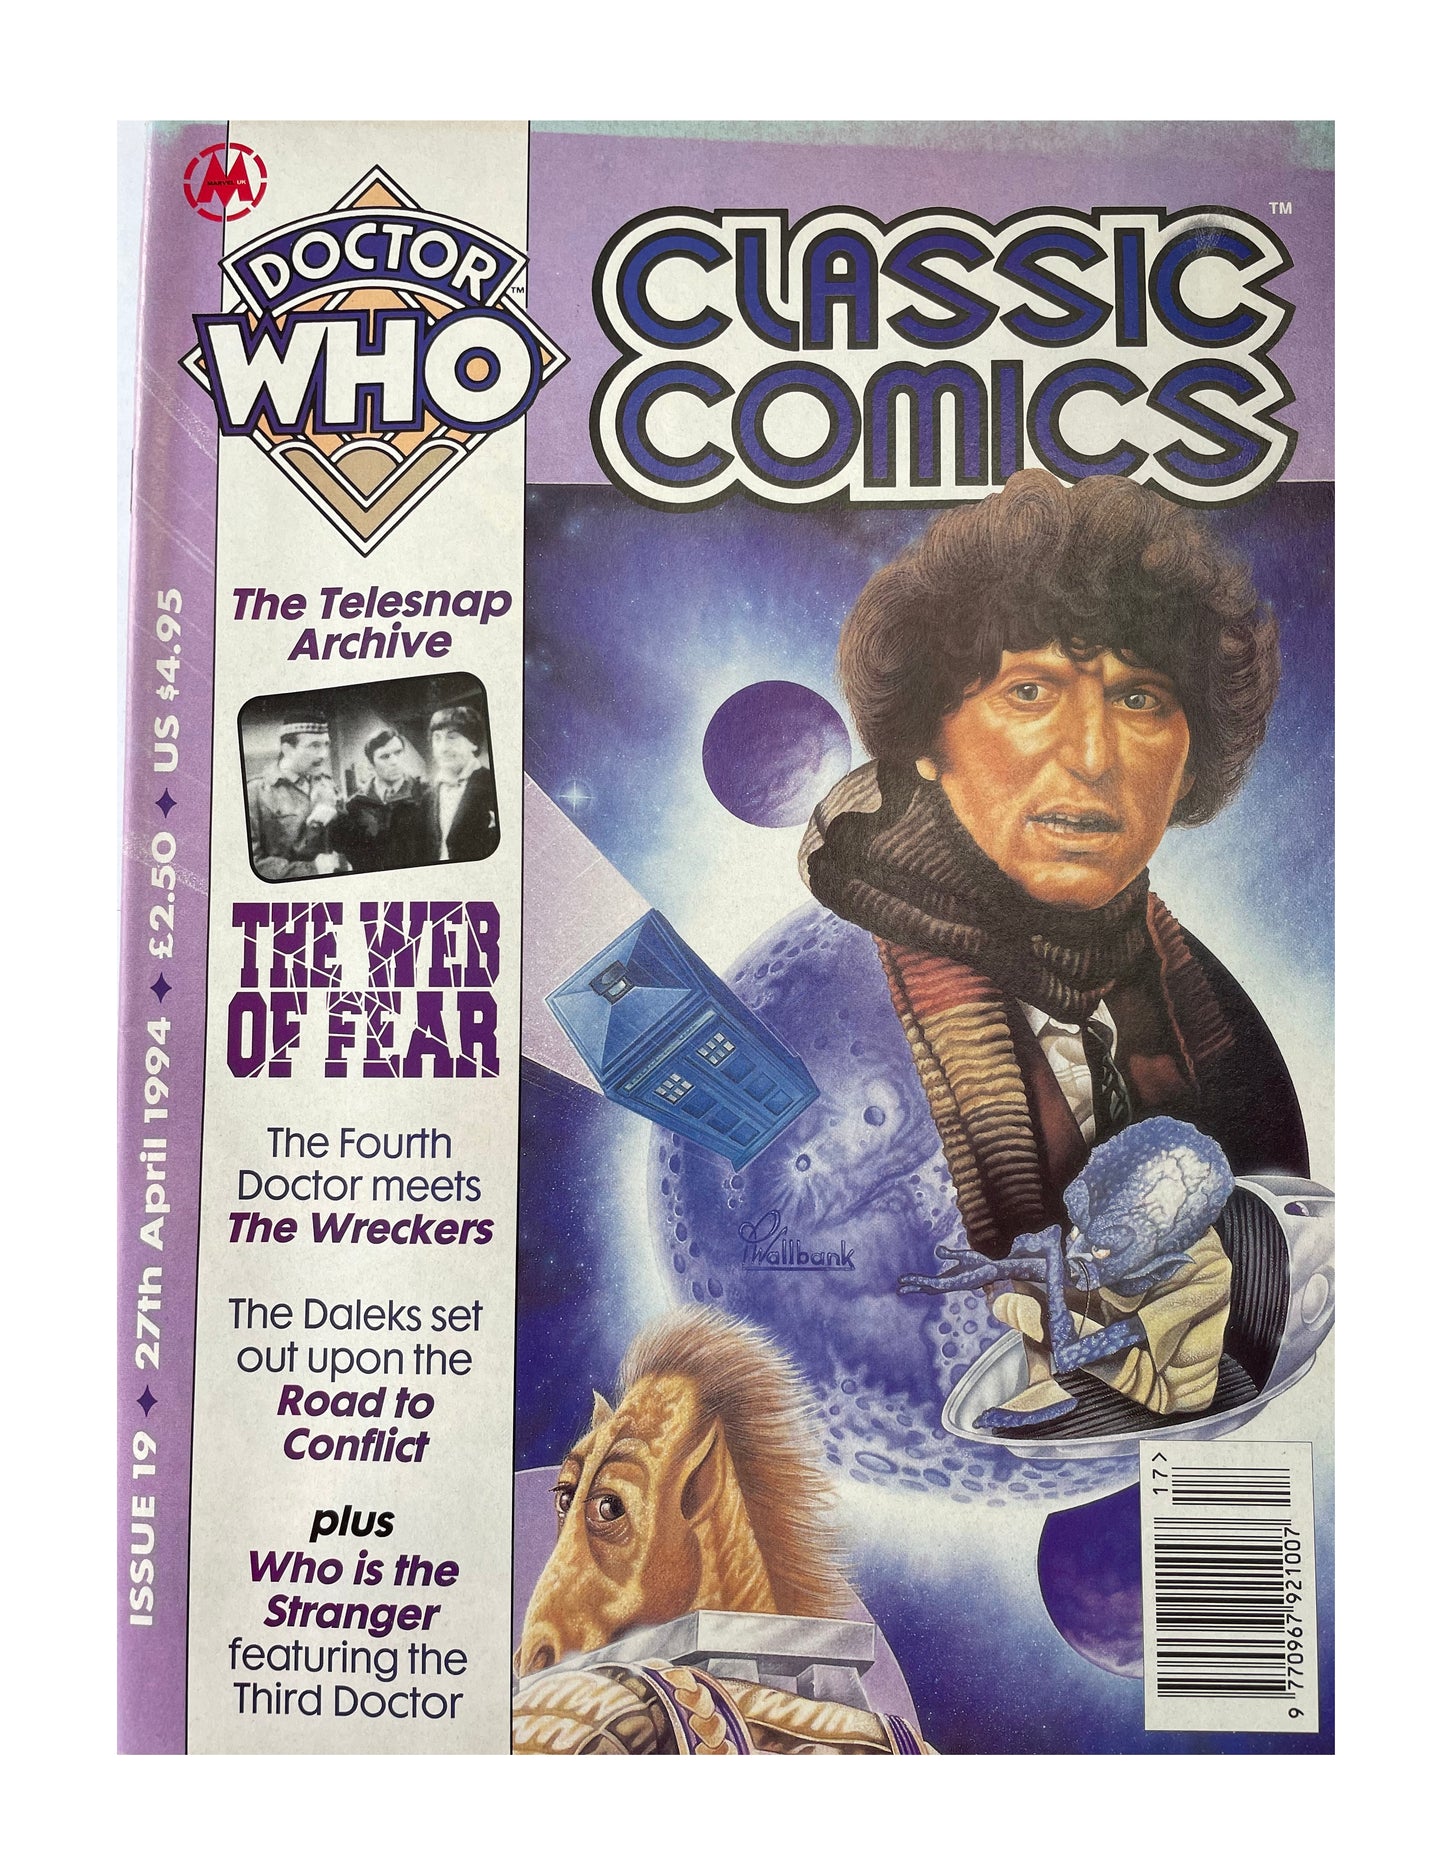 Vintage 1994 Marvels Doctor Dr Who Classic Comics Full Colour Issue 19 Comic 27th April 1994 - Brand New Shop Stock Room Find